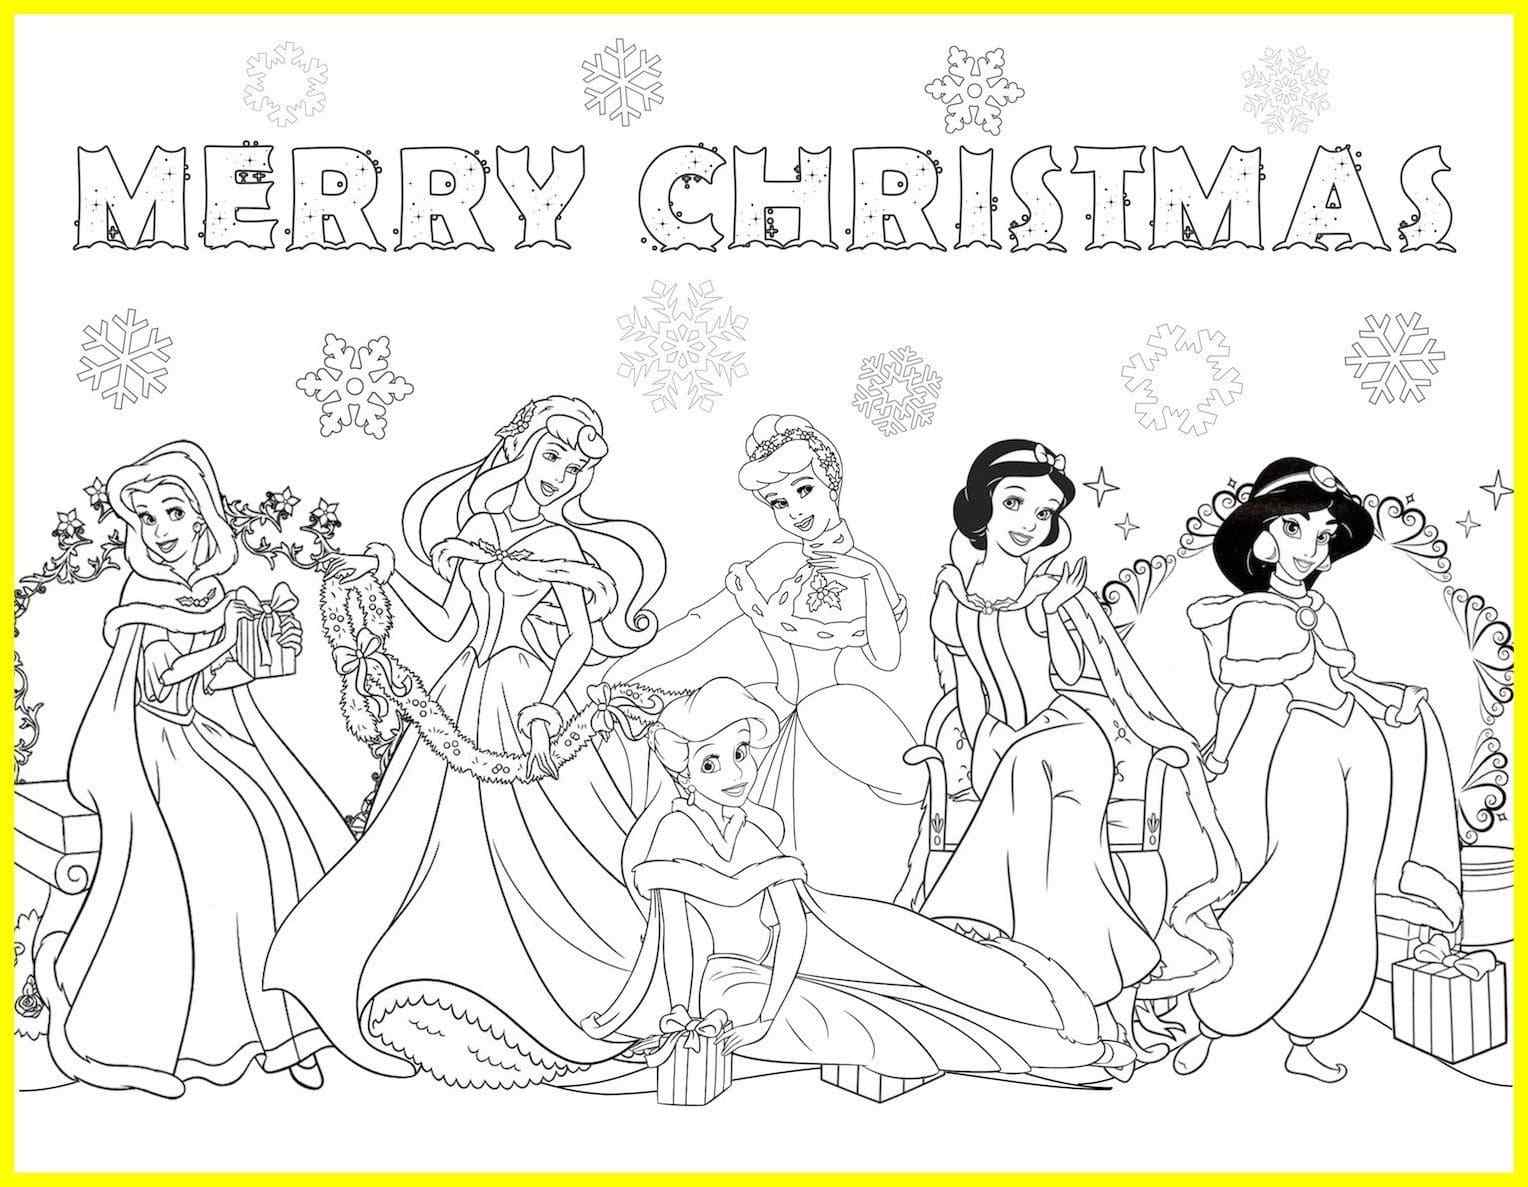 Disney princesses In Christmas Coloring Page